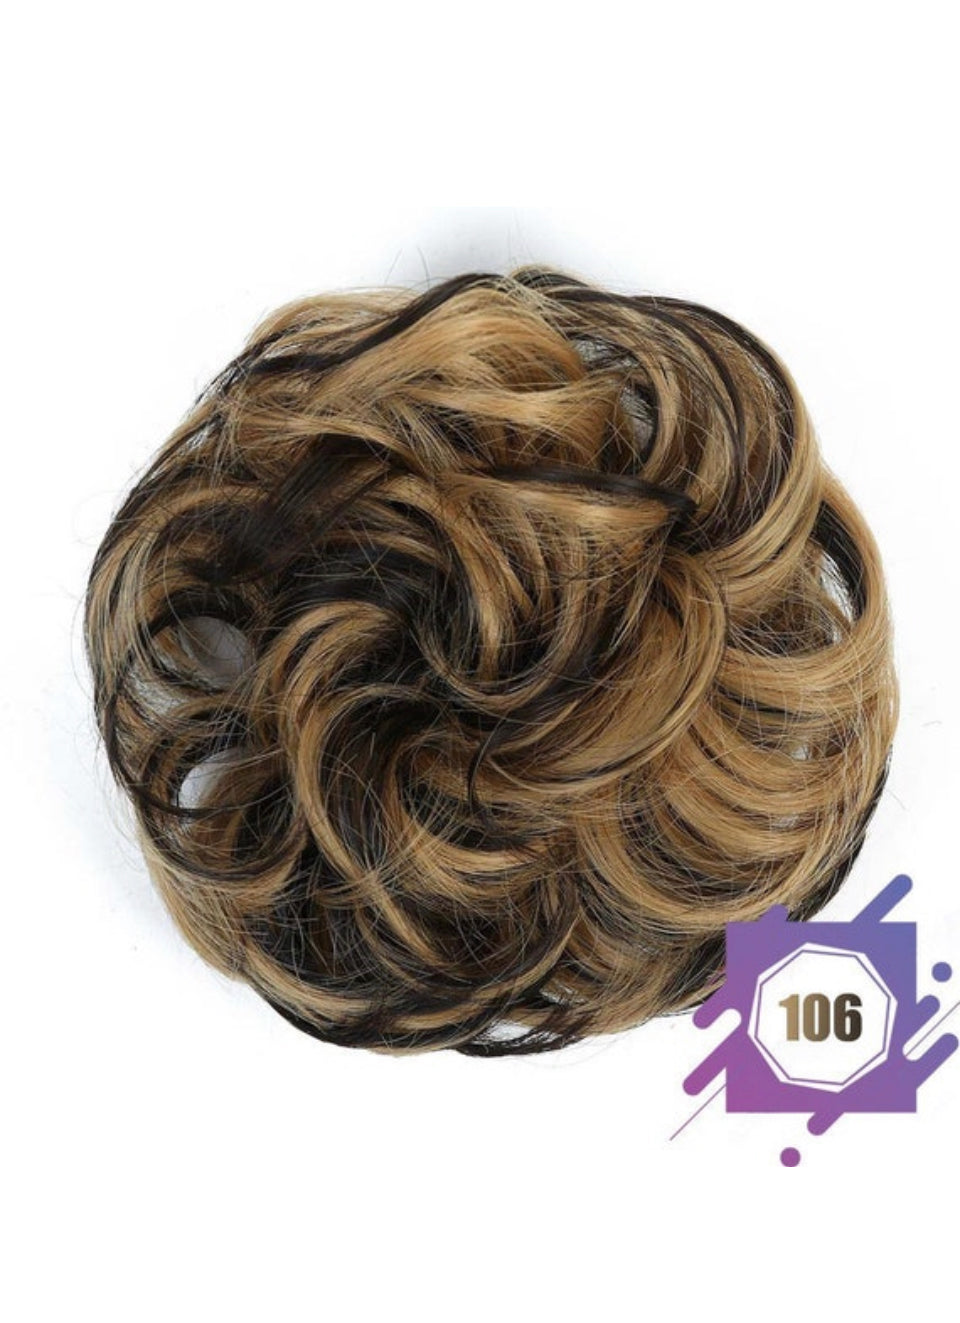 Curly Messy Hair Bun Piece Updo Scrunchie Fake Natural Bobble Hair Extensions UK